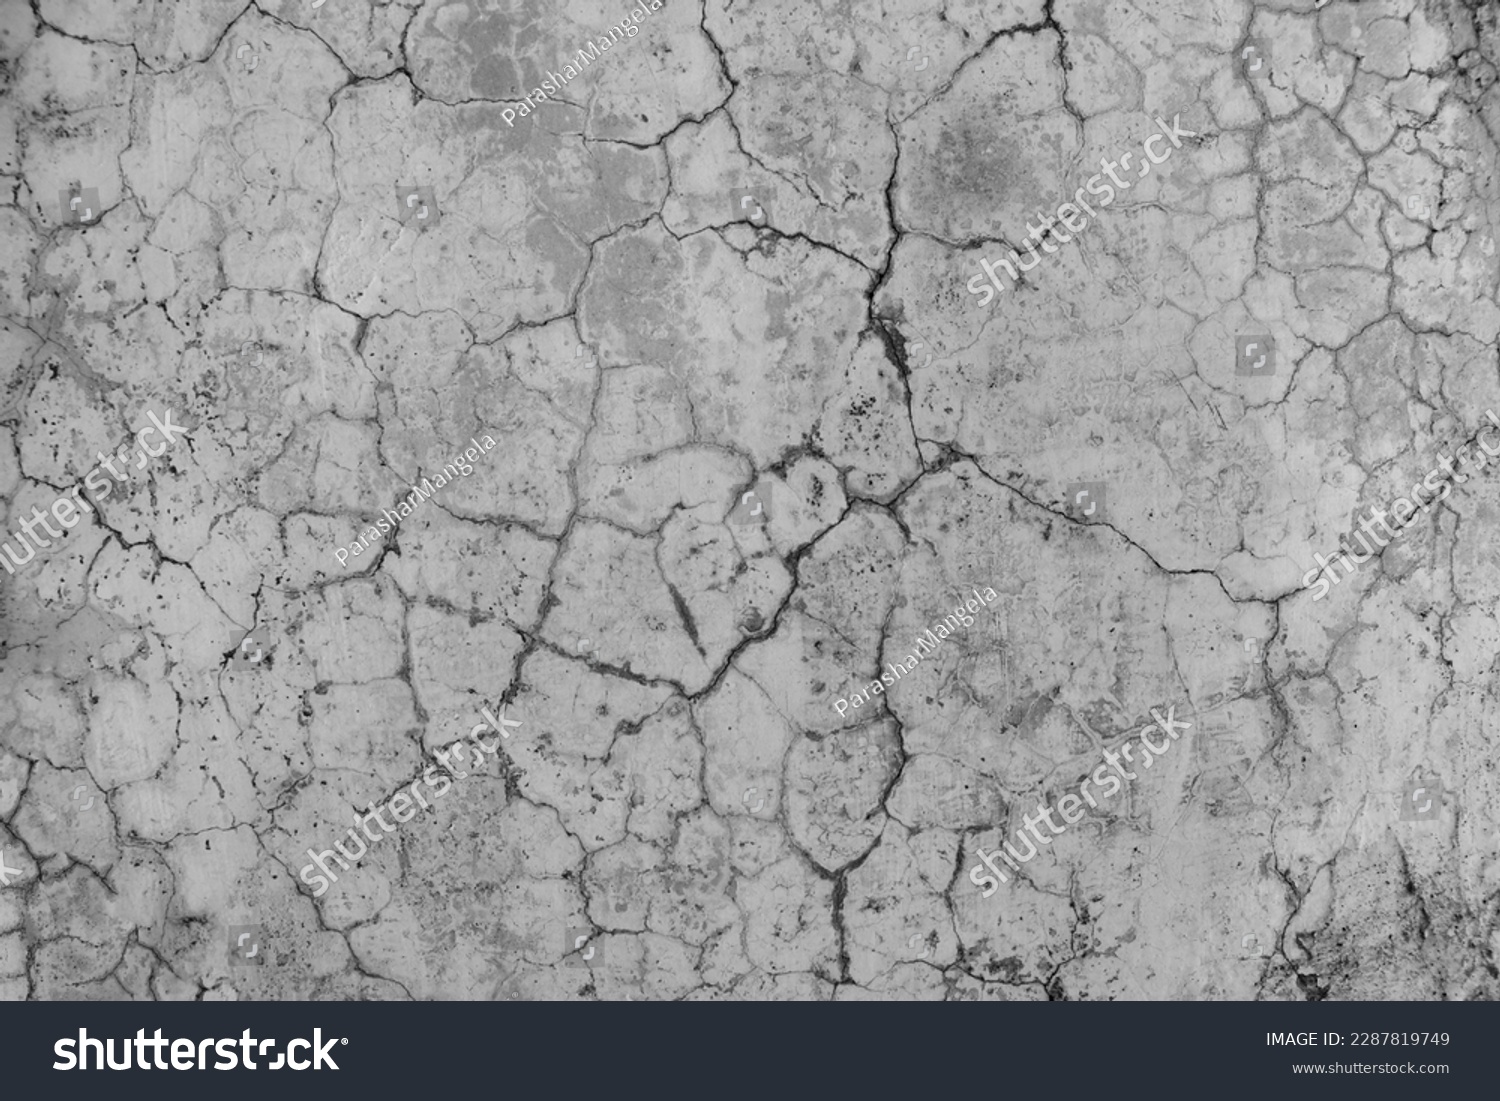 Grey cracked concrete wall texture. Abstract background of crack concrete wall. #2287819749